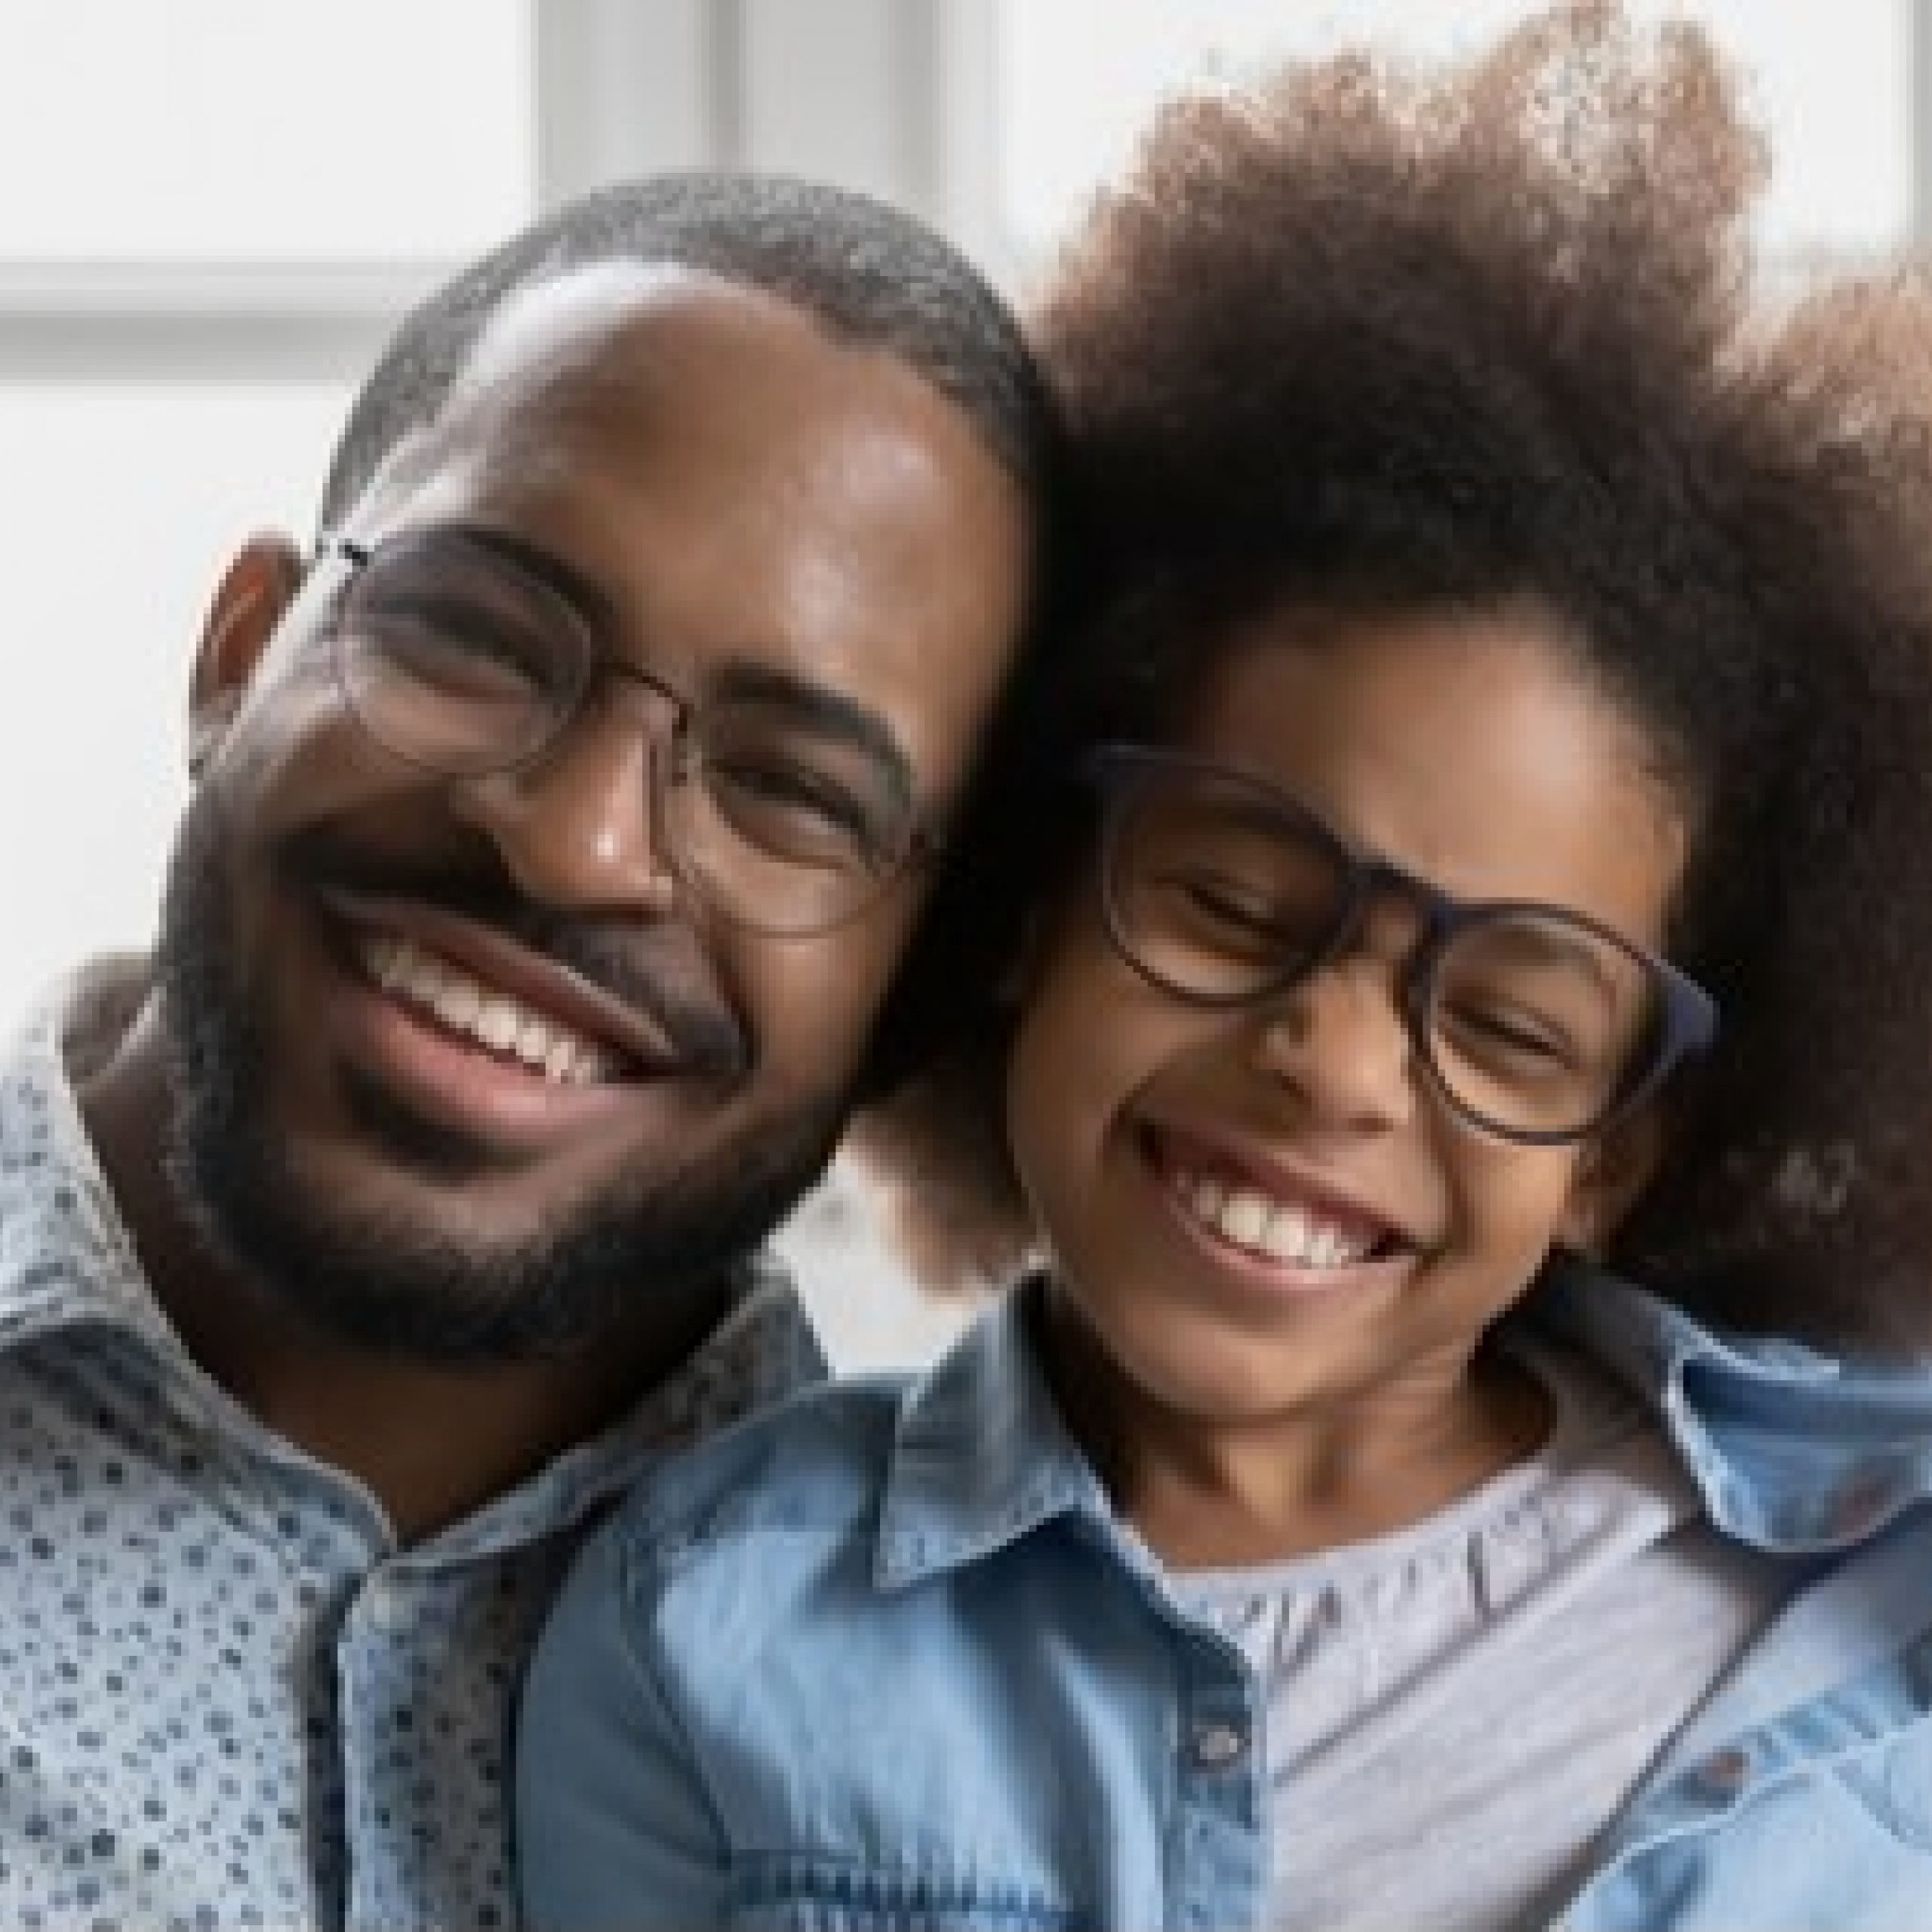 Father and daughter smiling. Both wear glasses and have beautiful smiles.